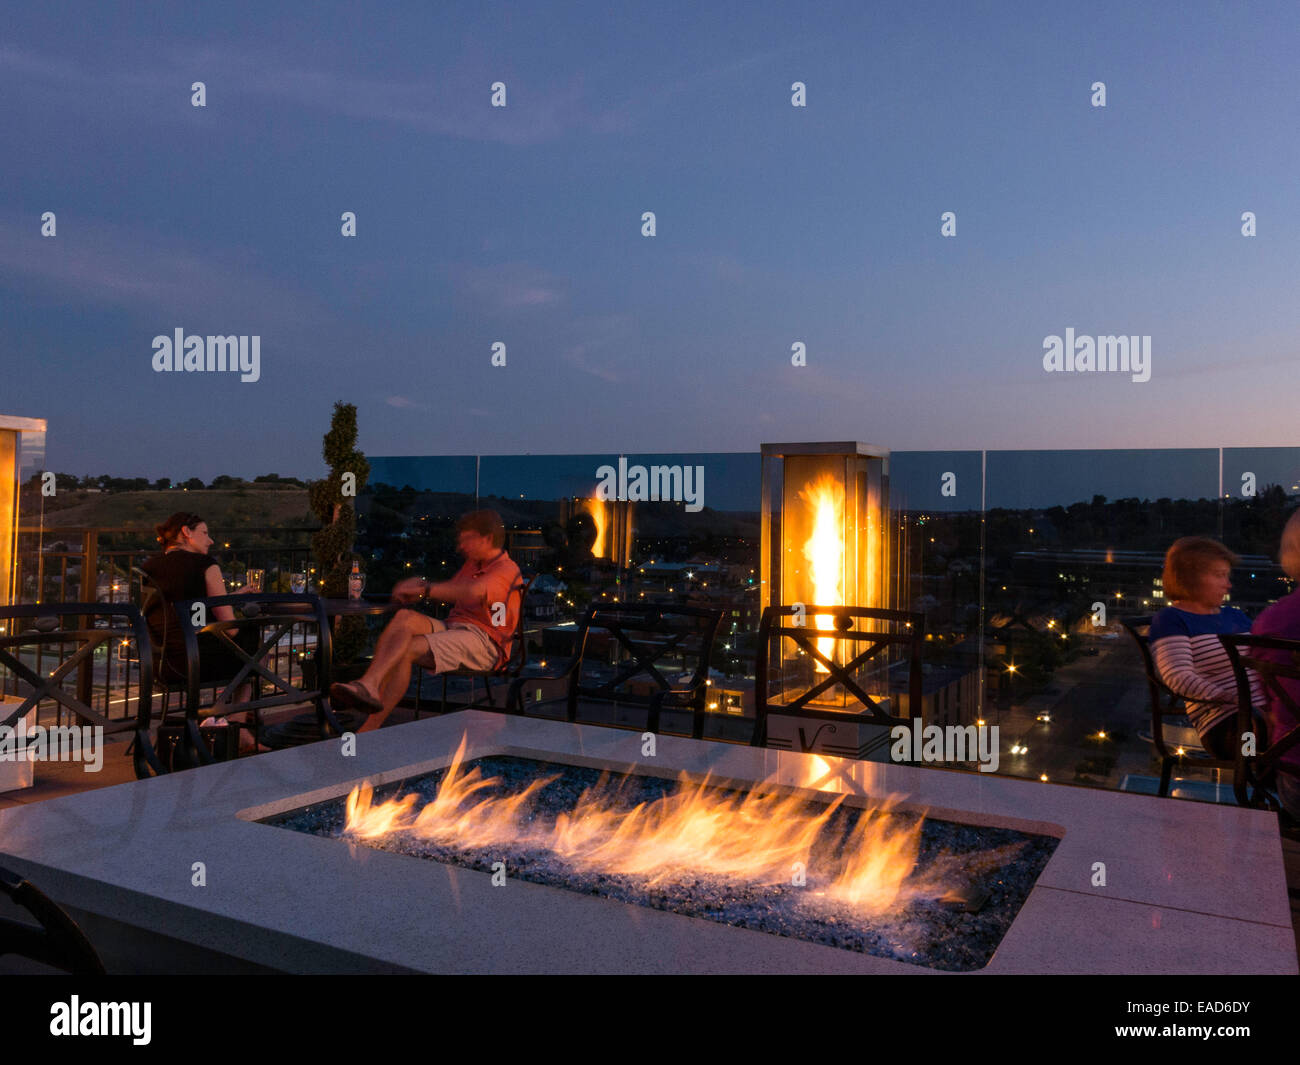 Patrons at Rooftop Bar Area with Fire Pits,  Alex Johnson Hotel, Rapid City, SD, USA Stock Photo